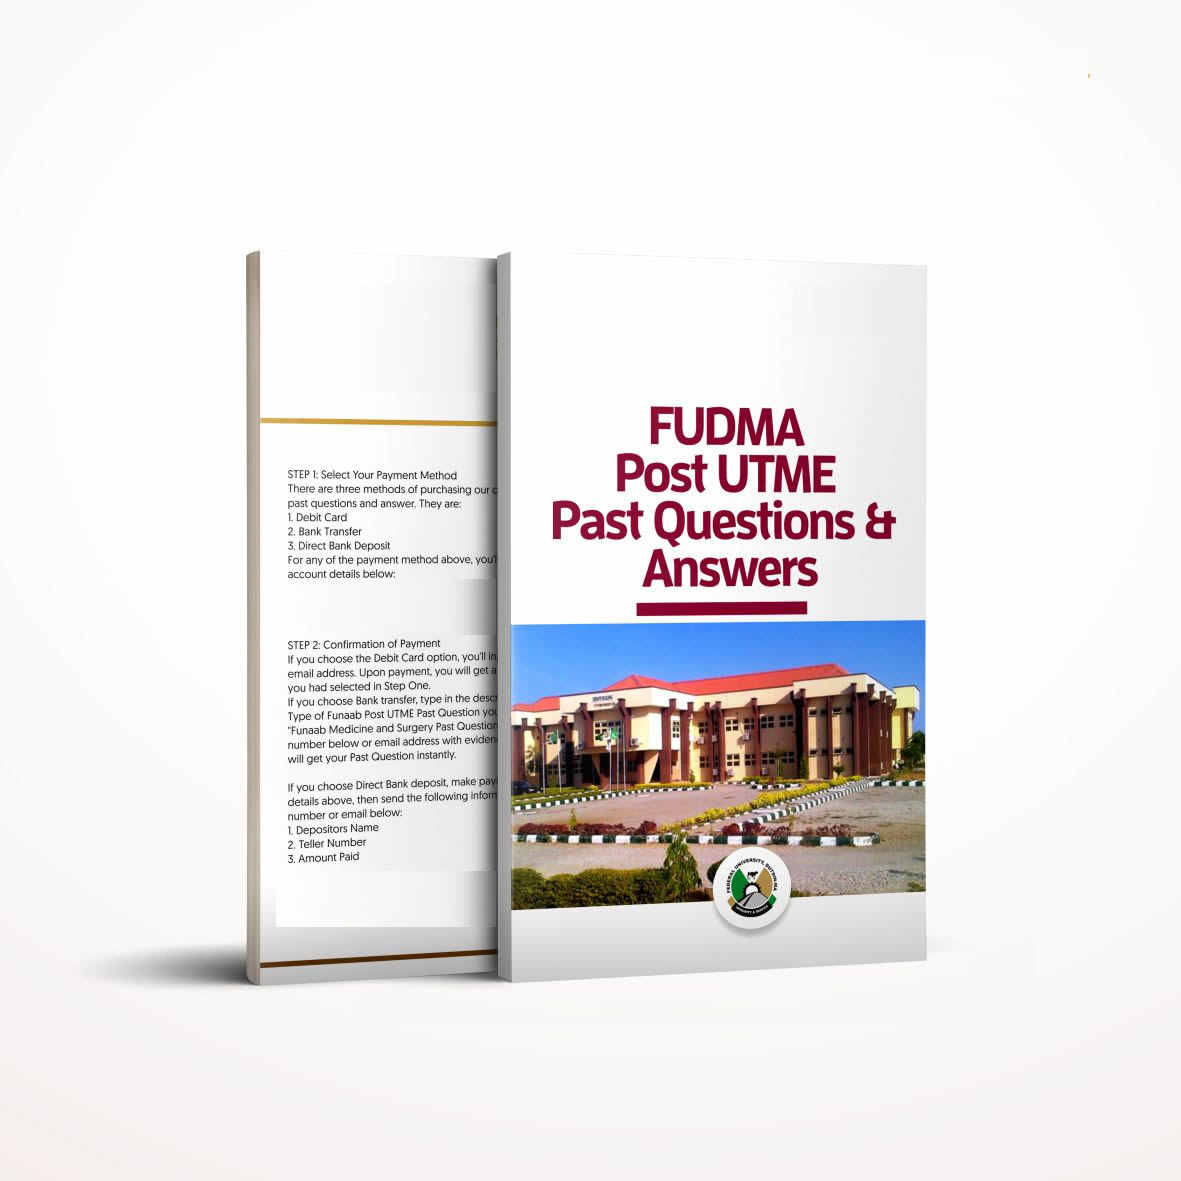 fudma post utme past questions and answers - Pdf